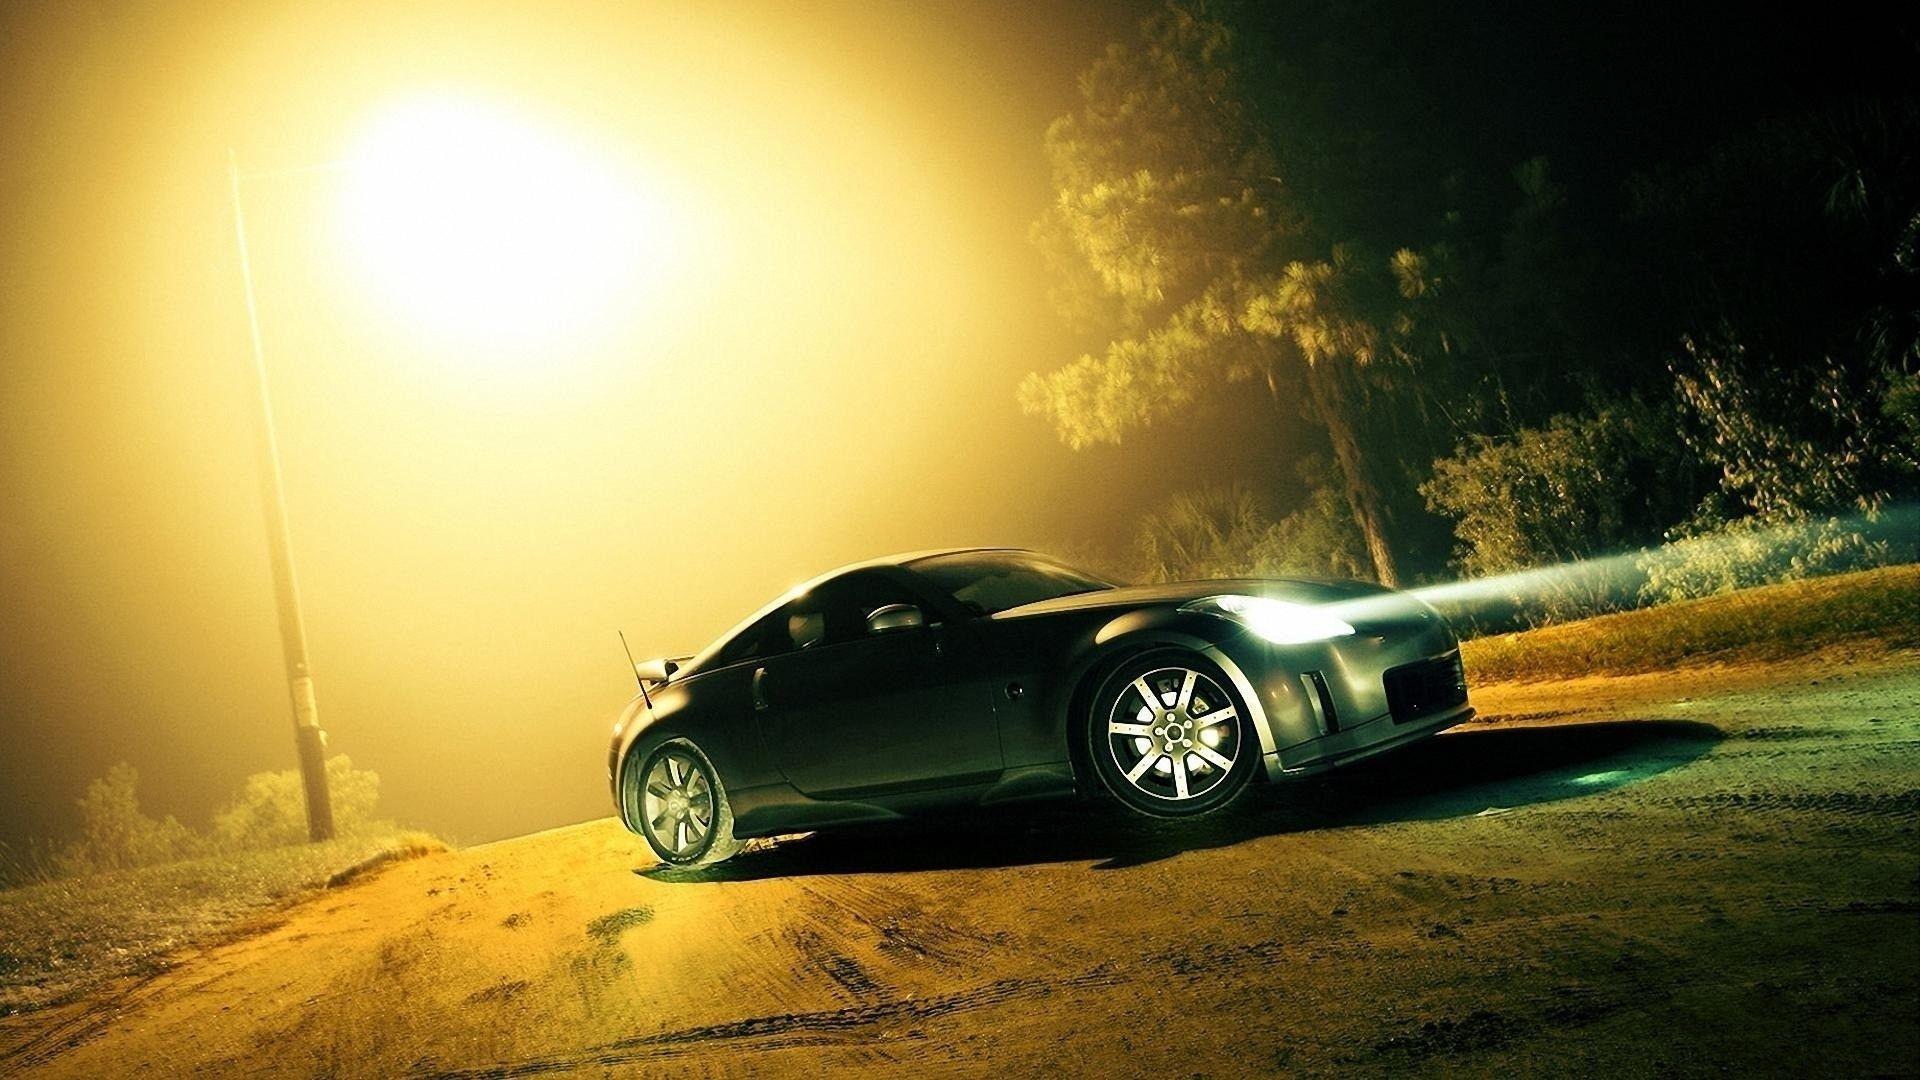 Download Nissan 350z Wallpapers 20142 1920x1080 px